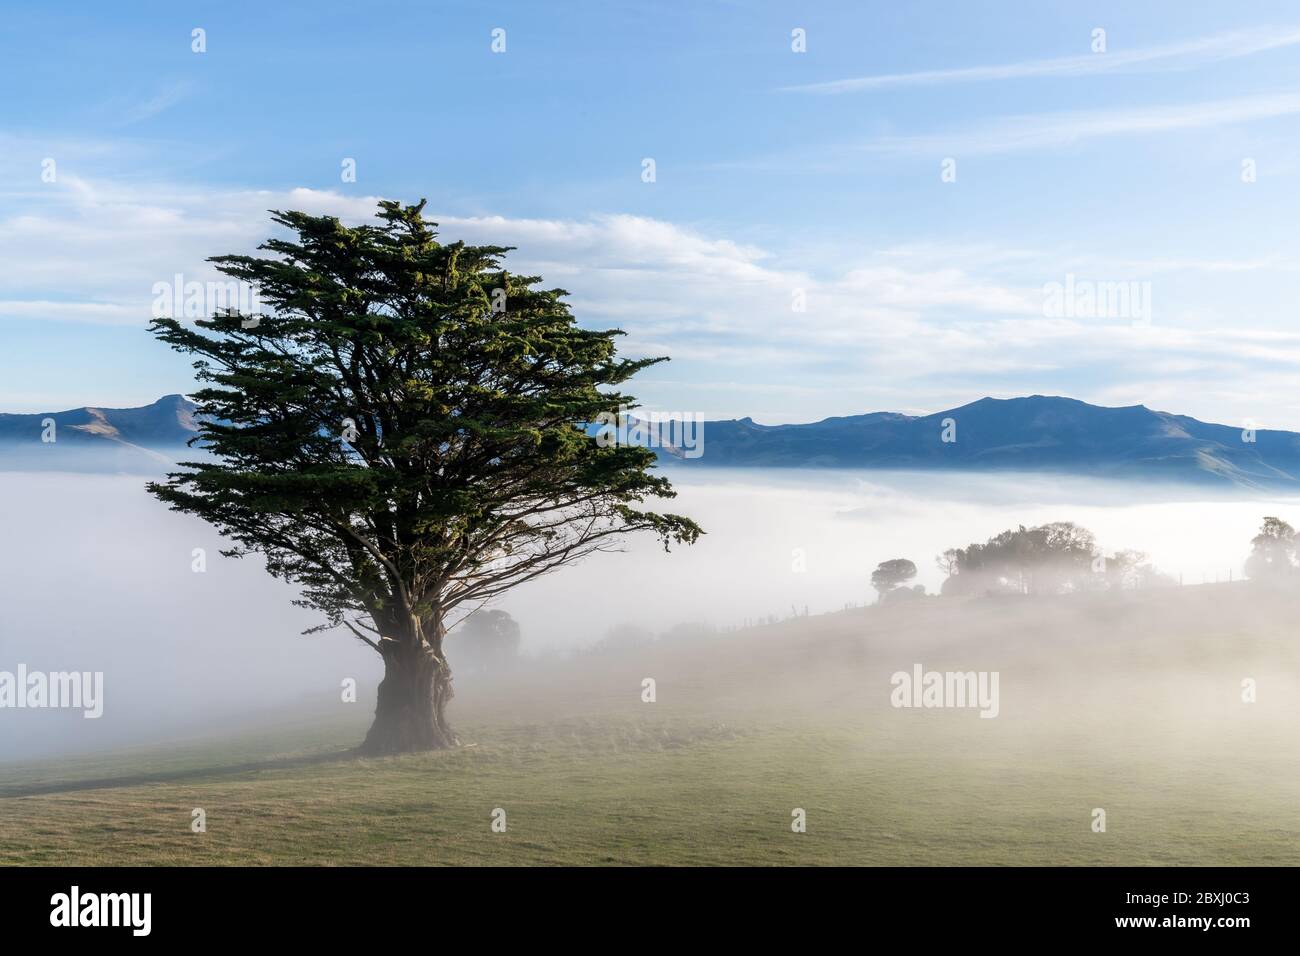 Silhouette of mountains in the misty morning. View of the mountains in early winter. Beautiful nature landscape. Bank Peninsula, Robinsons bay, Canter Stock Photo